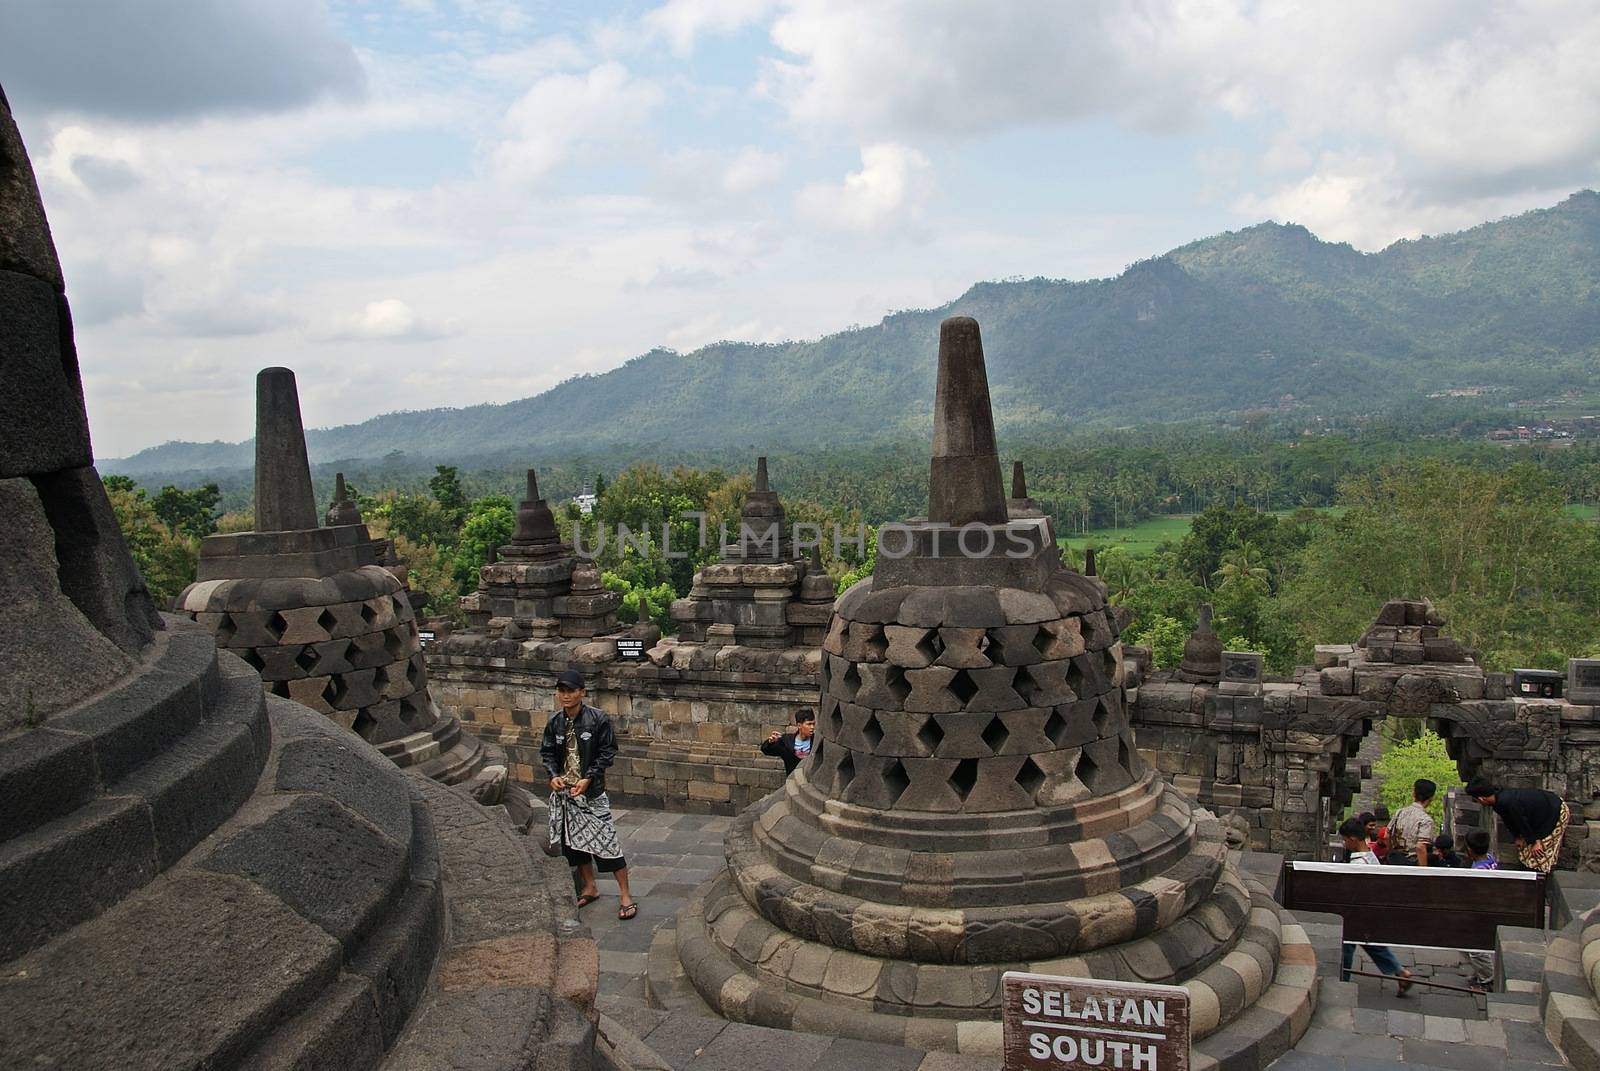 Around the circular platforms are 72 openwork stupas, each containing a statue of the Buddha. by craigansibin